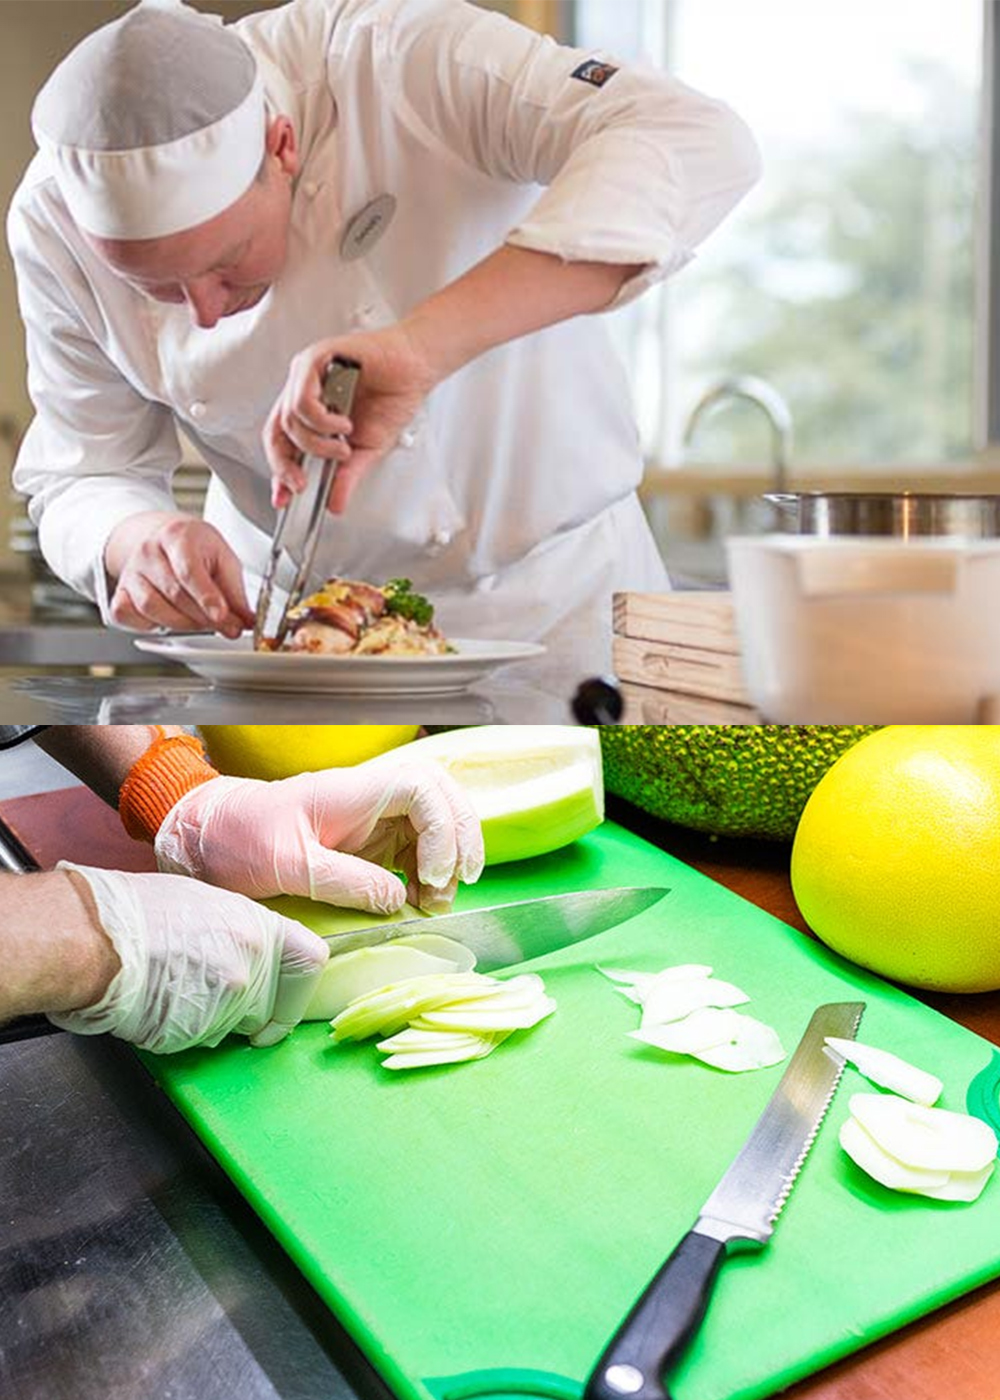 Food Safety in Hospitality Industry